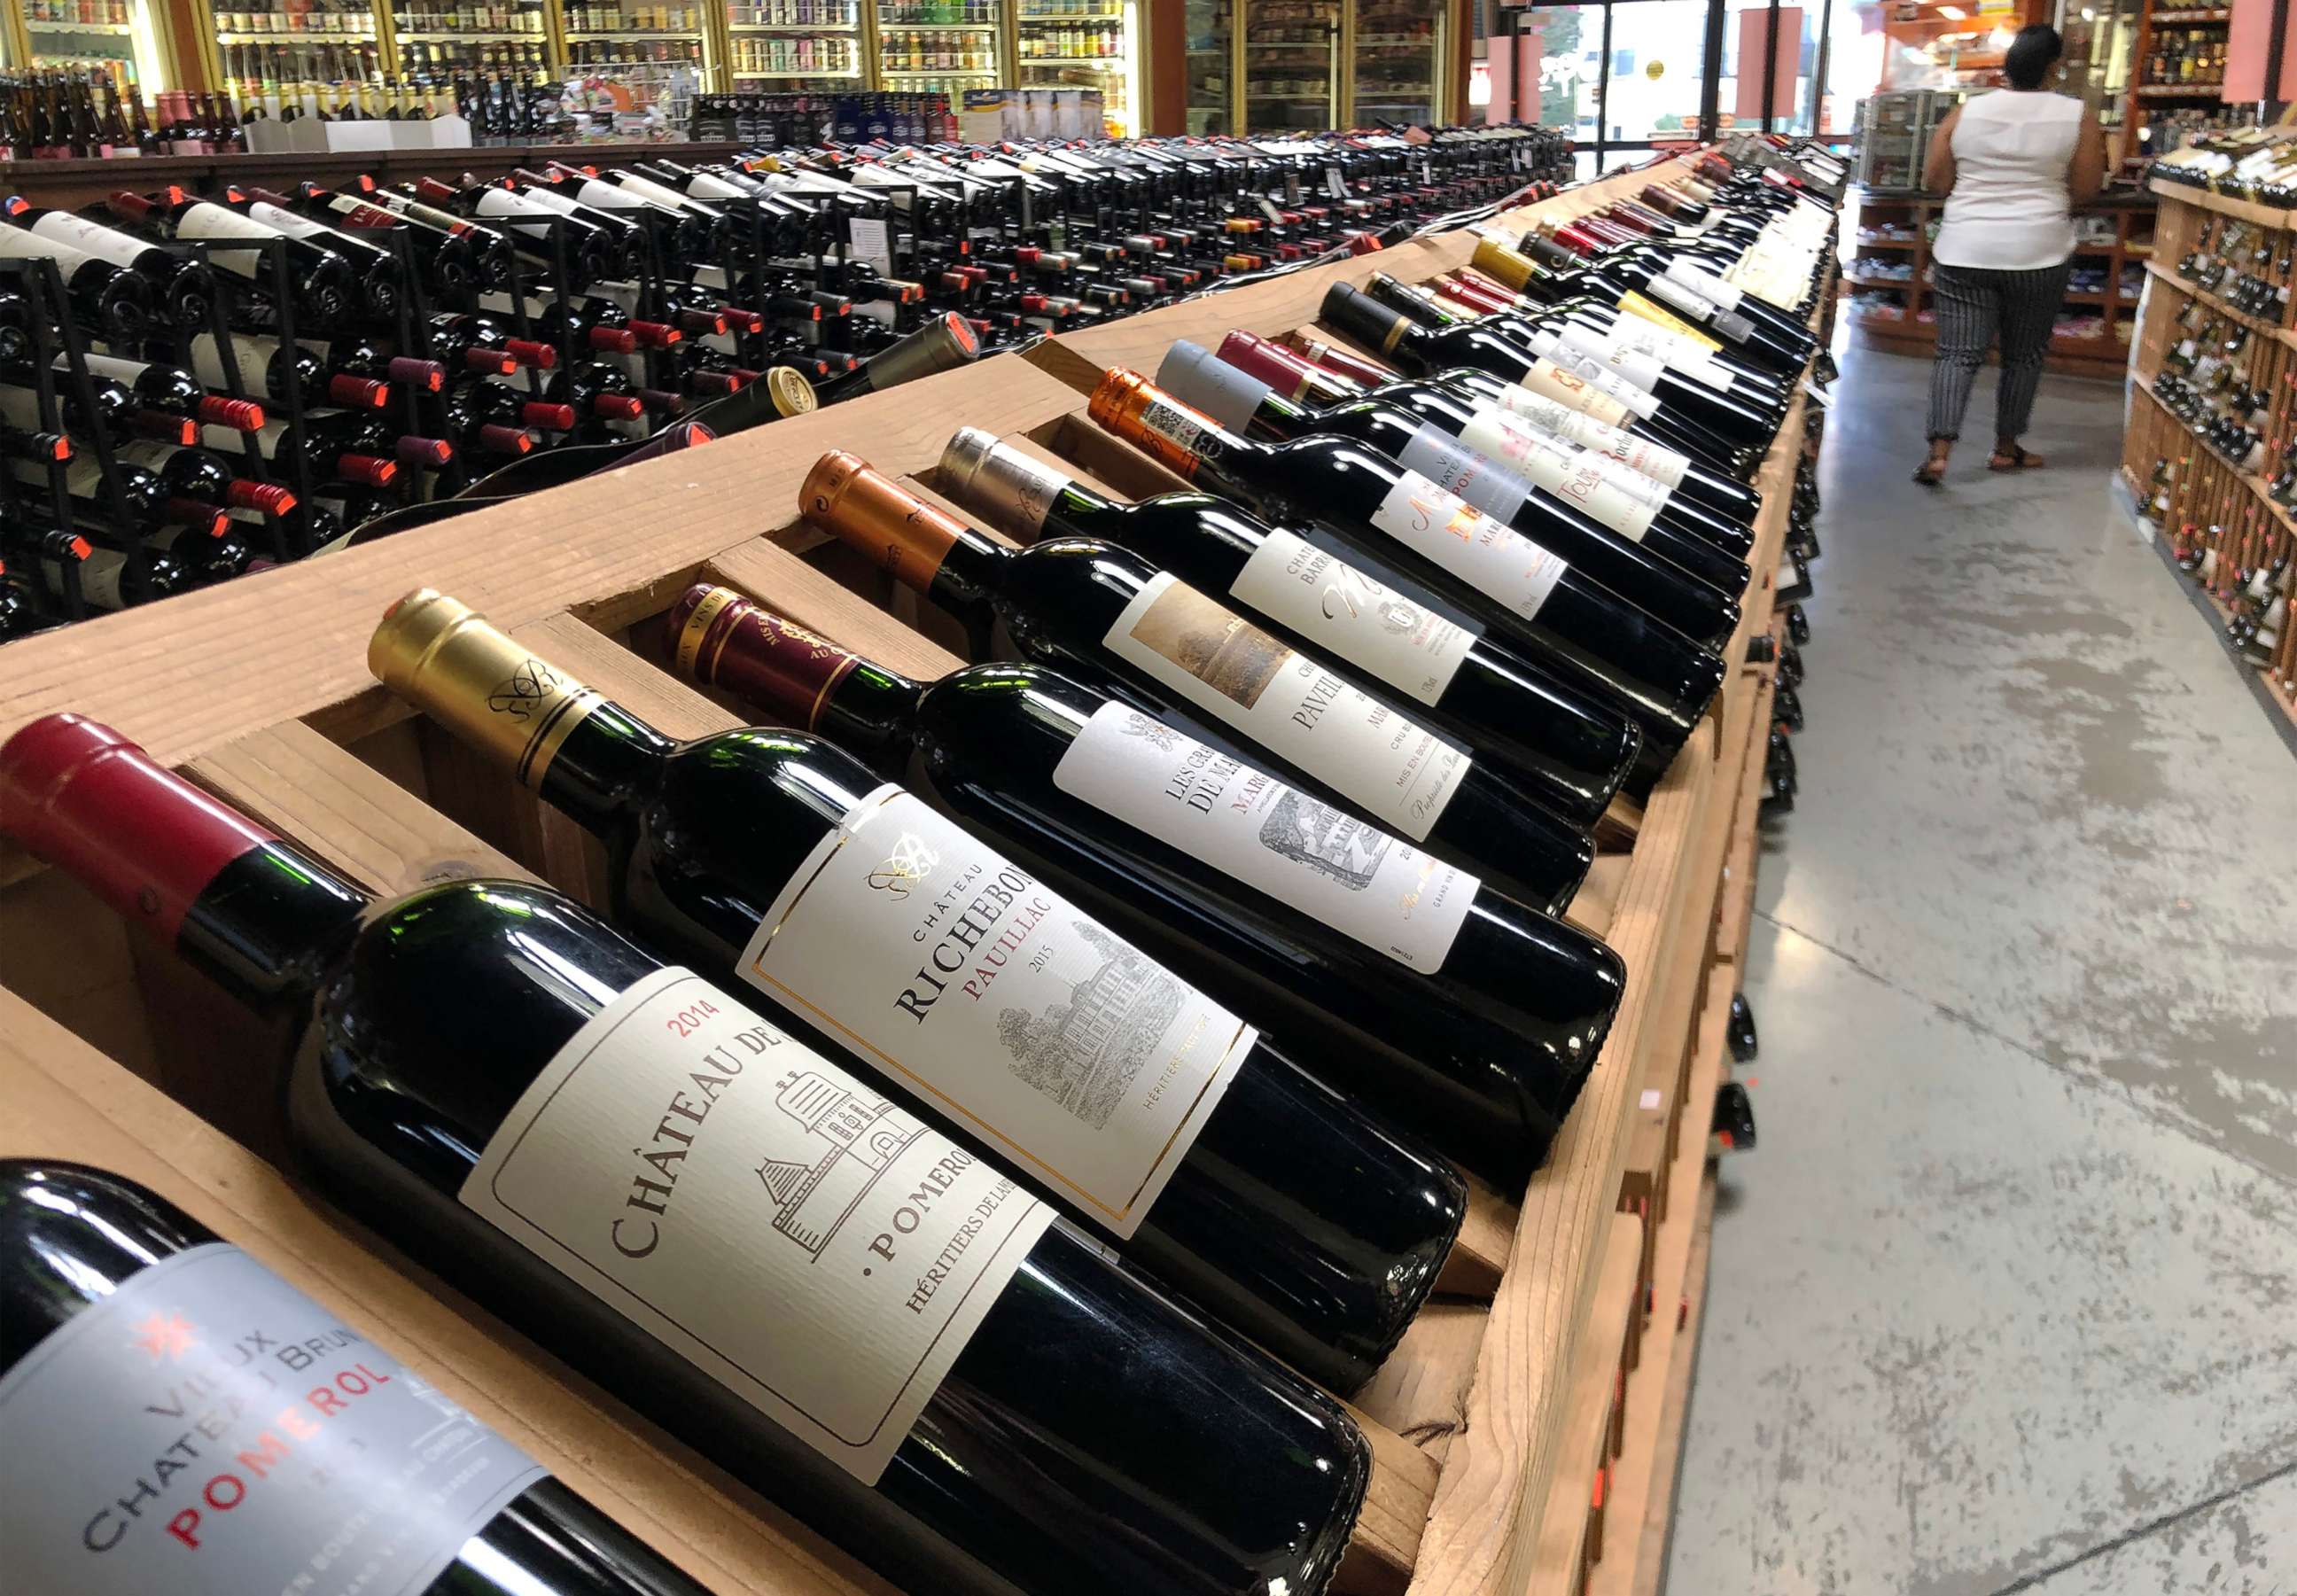 PHOTO: Bottles of French wine are displayed for sale in a liquor store on Oct. 3, 2019 in Los Angeles.